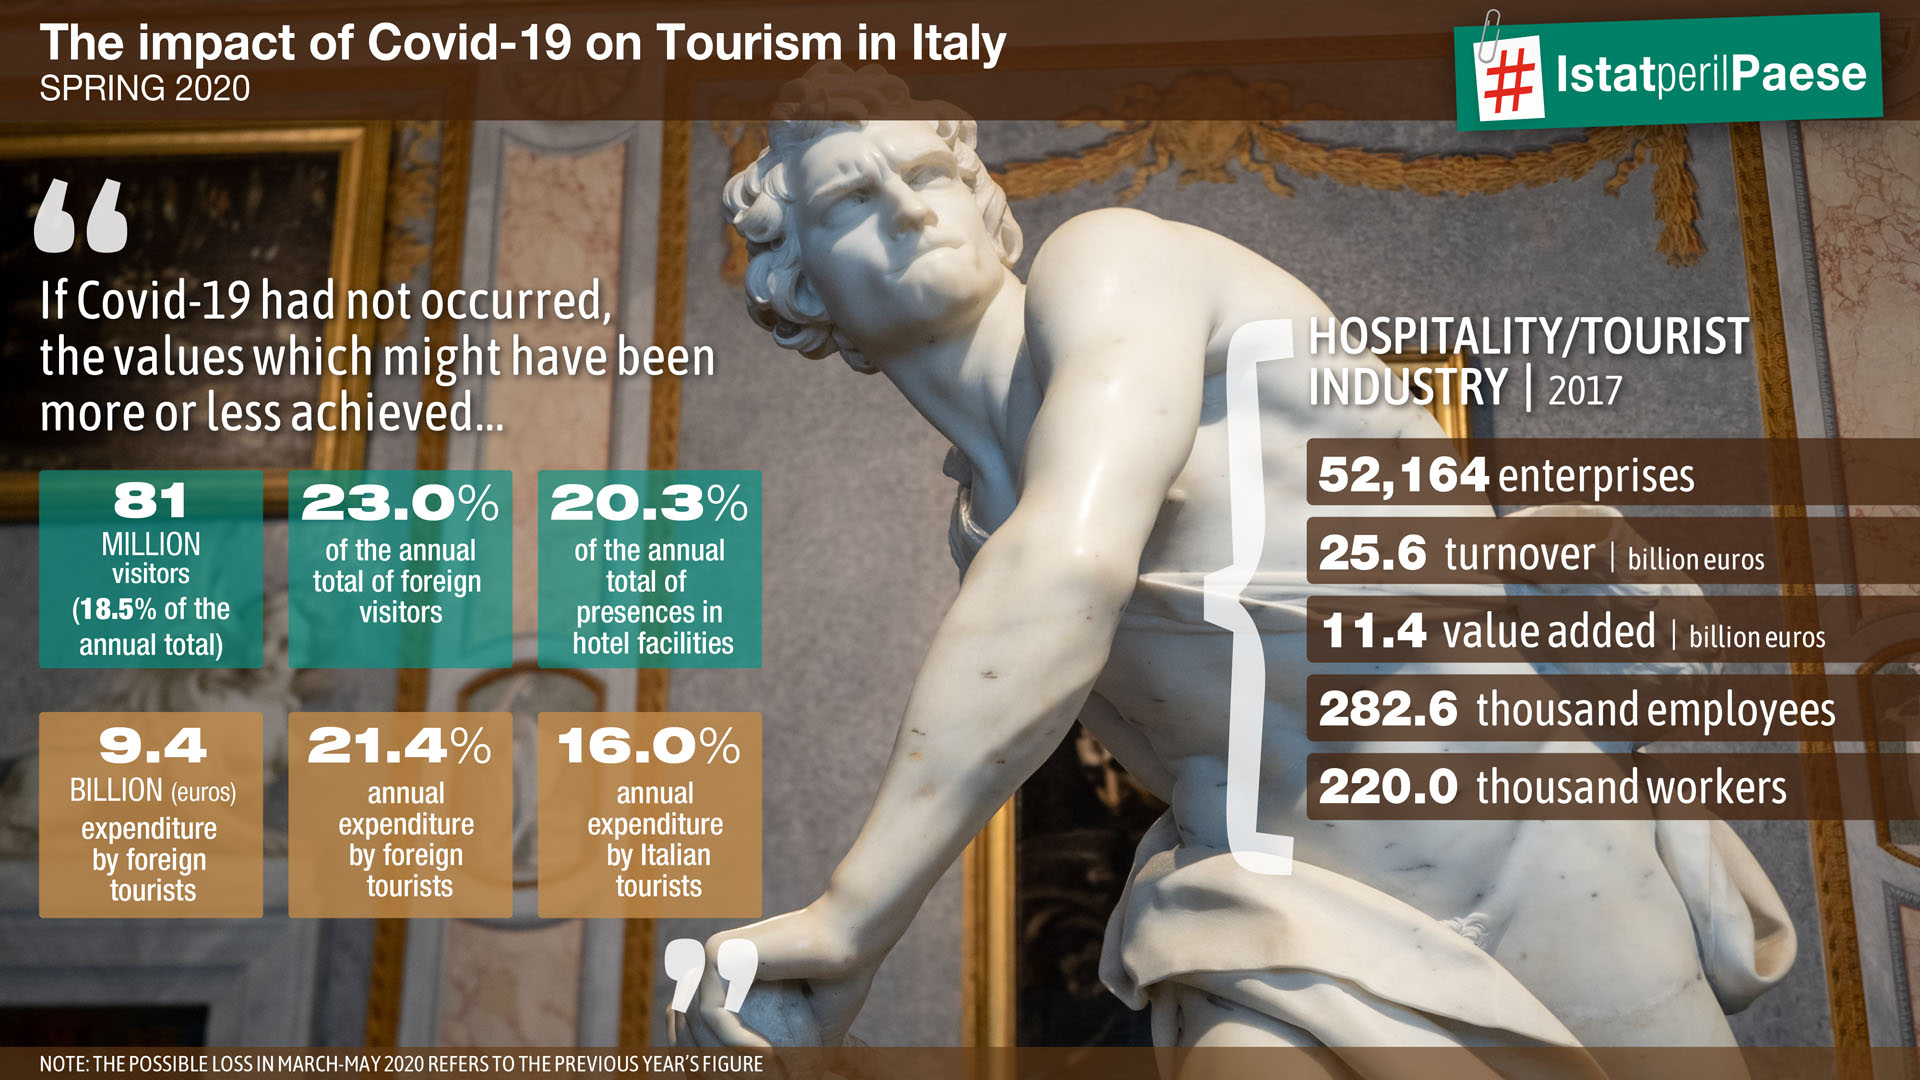 The impact of Covid-19 on tourism in Italy